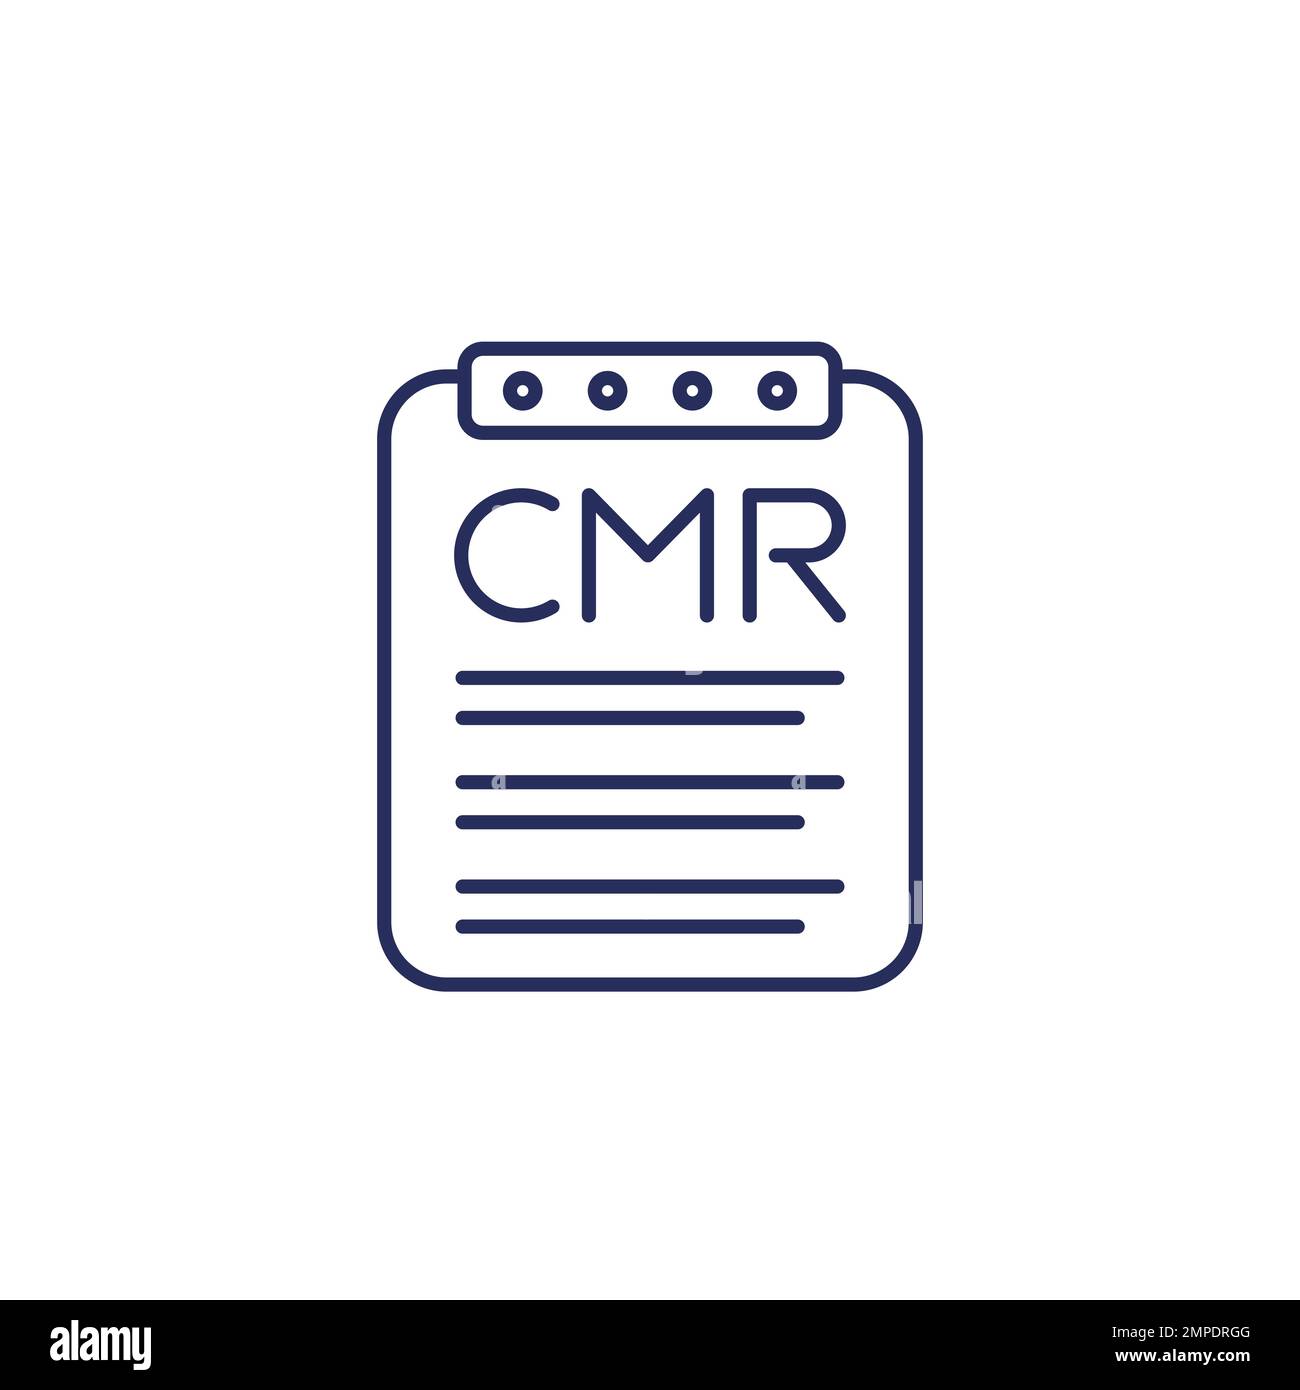 CMR icon, consignment note, transport document Stock Vector